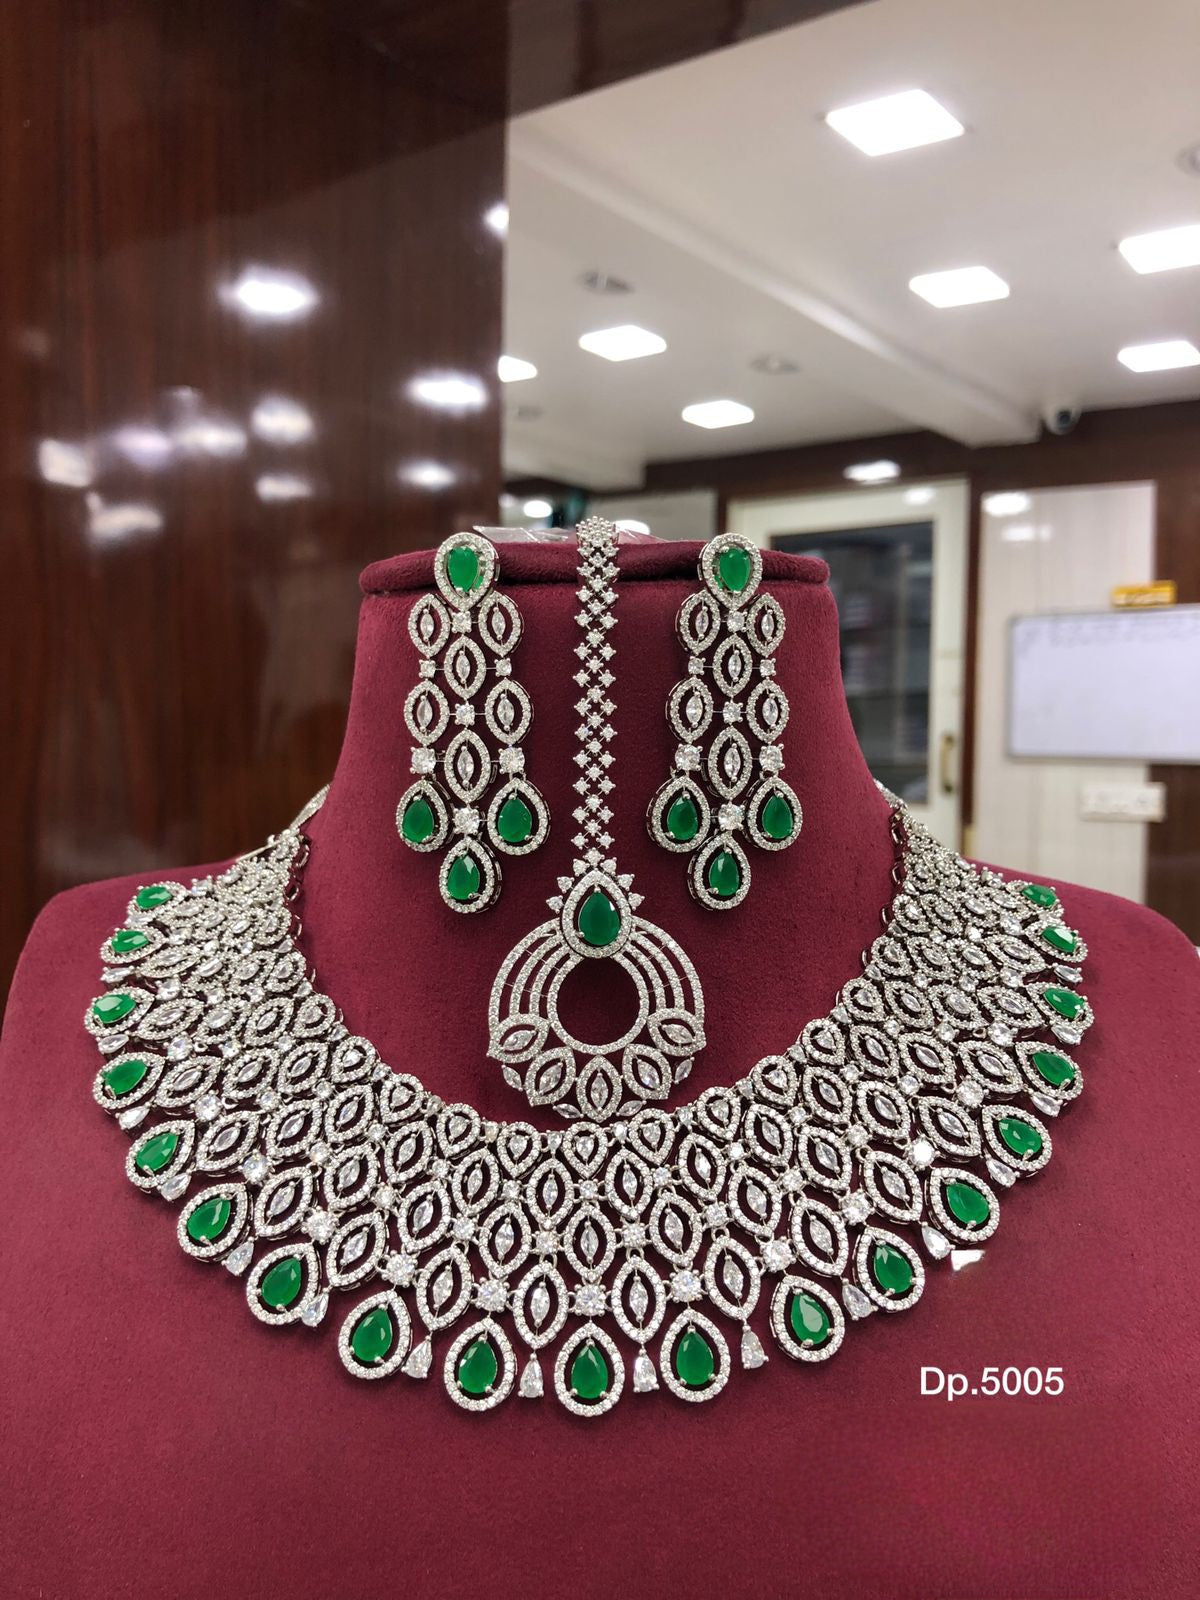 High Quality American diamond Full-bridal Necklace With Earrings and Maangtikka available in silver on rose gold polished/  green on silver polished